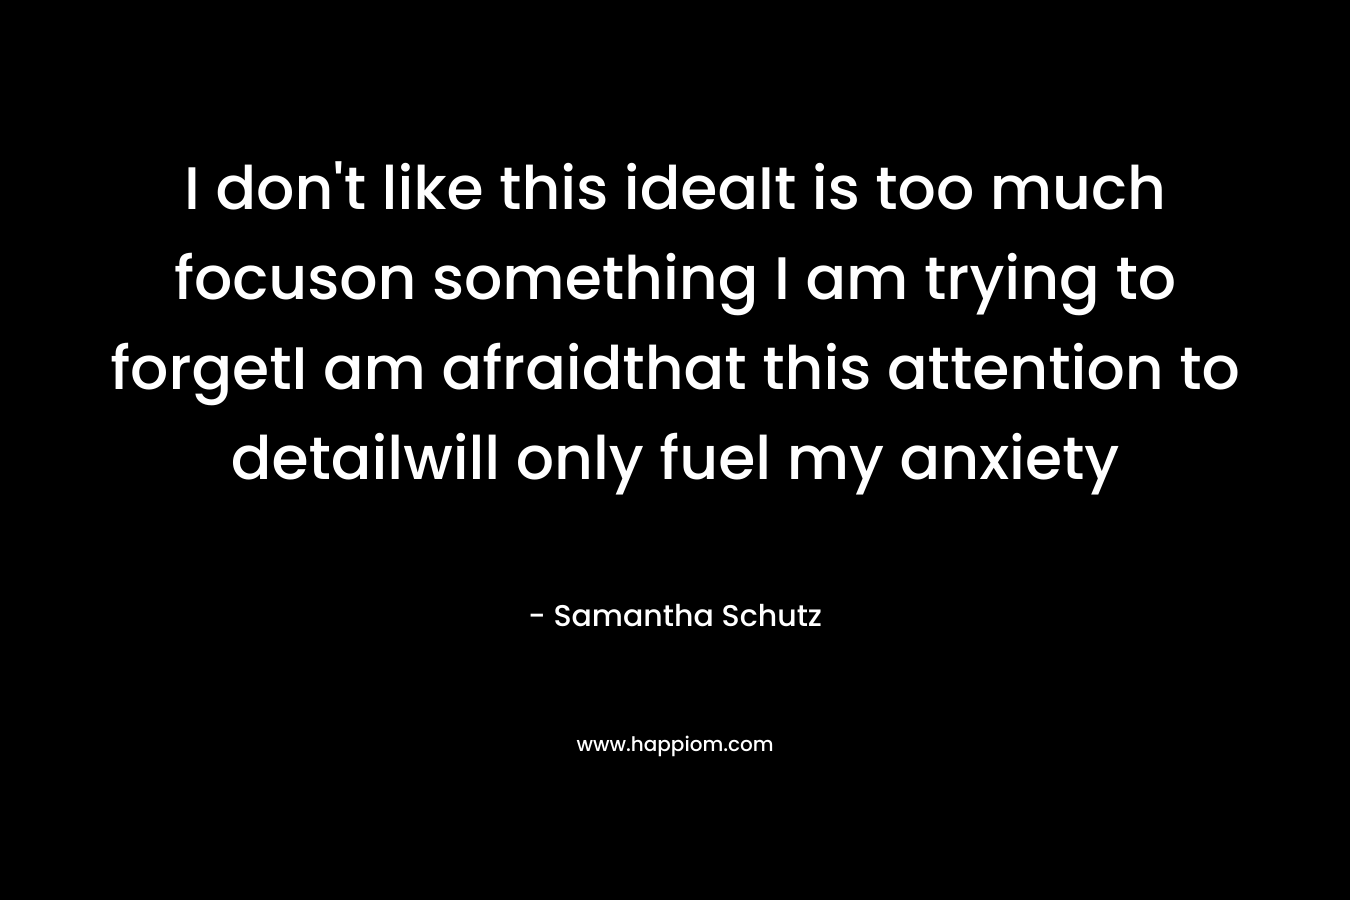 I don’t like this ideaIt is too much focuson something I am trying to forgetI am afraidthat this attention to detailwill only fuel my anxiety – Samantha Schutz